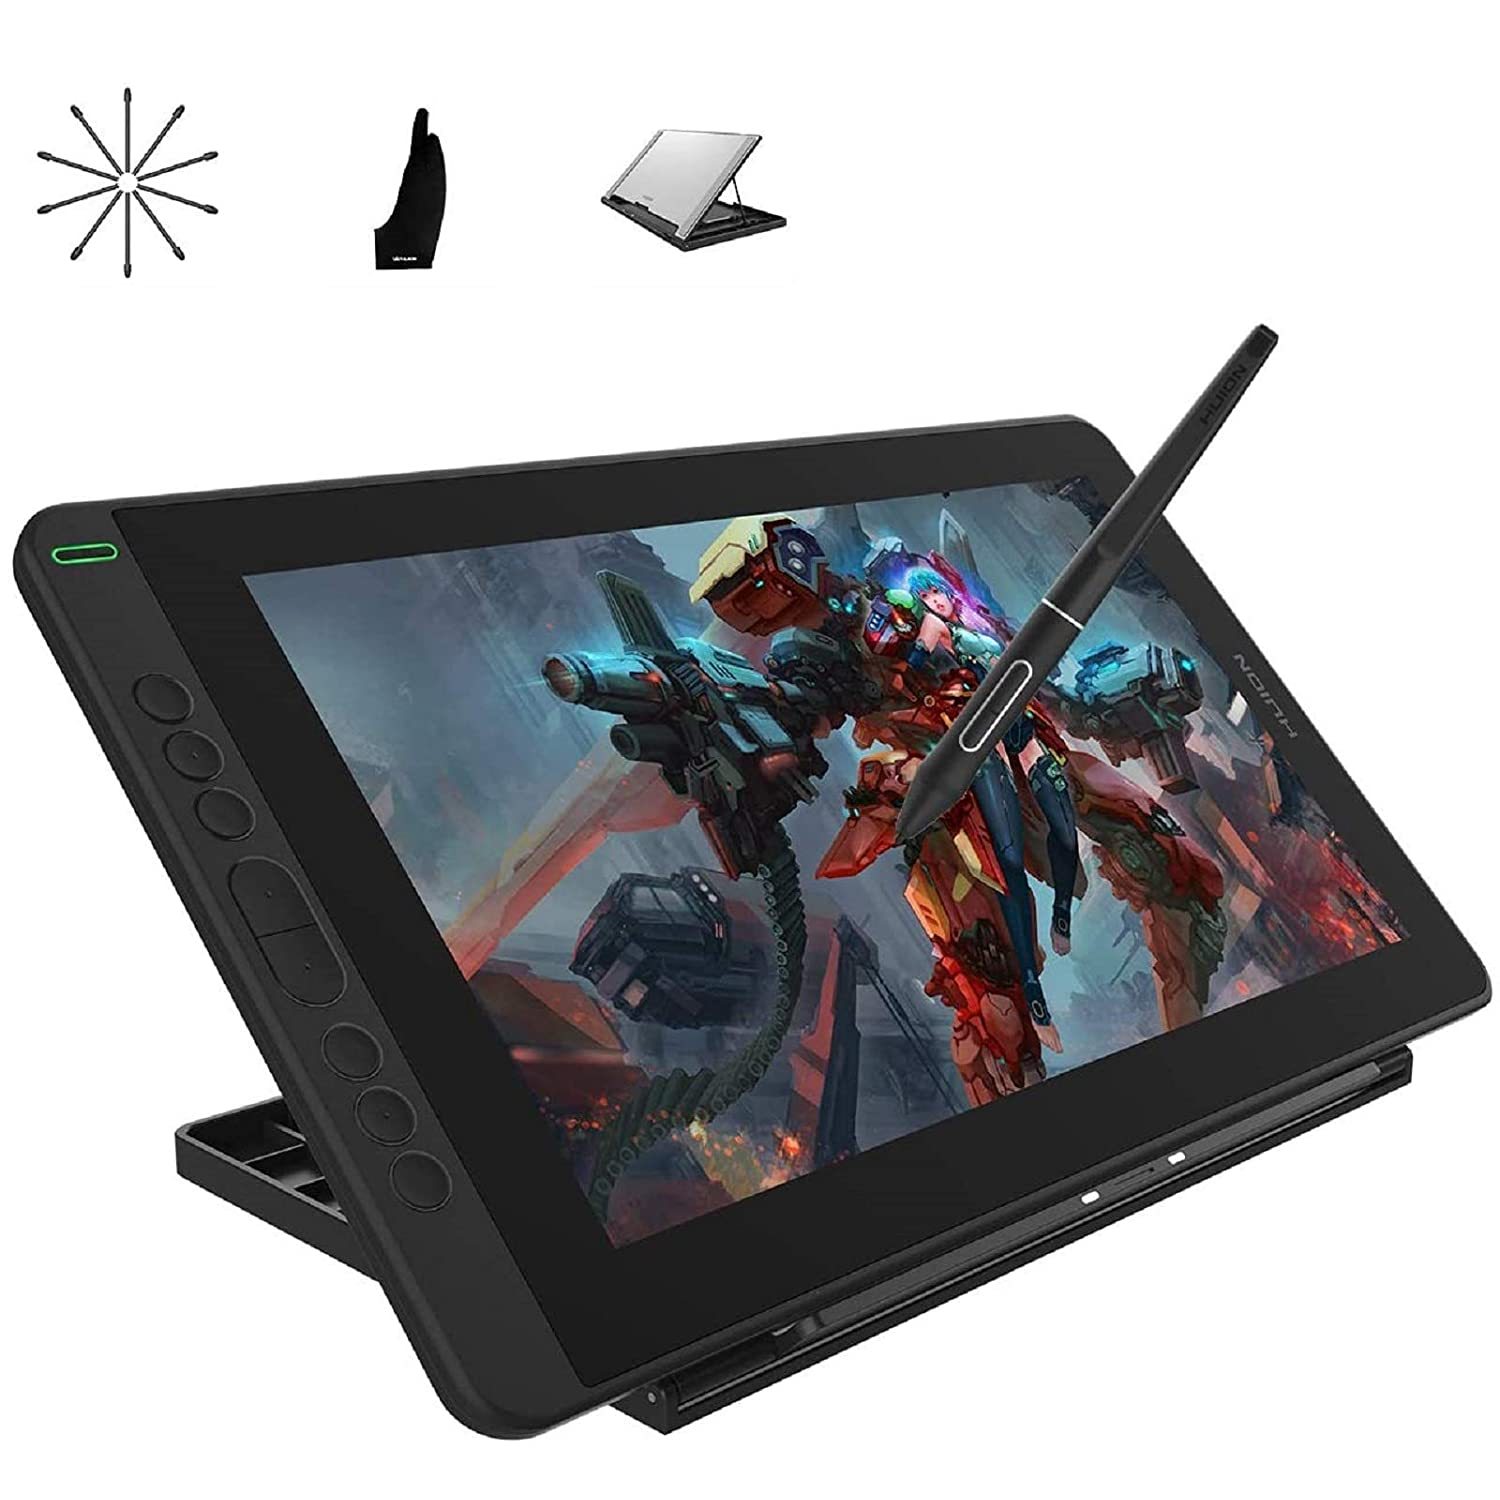 2020 Huion Kamvas 13 Android Support Graphics Drawing Tablet Monitor W